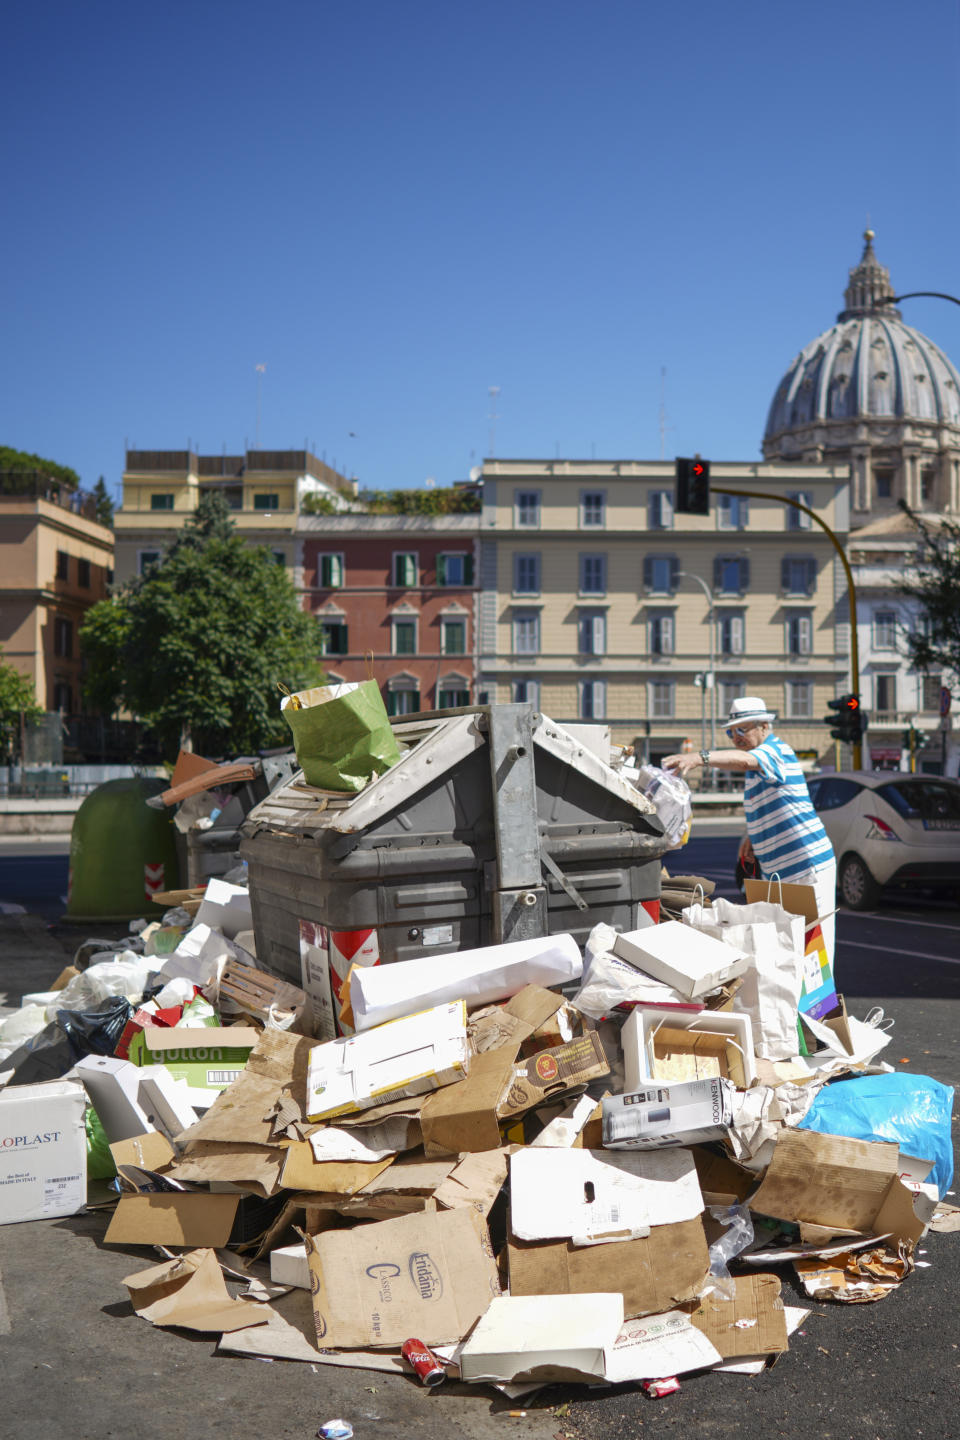 In this photo taken on Monday, June 24, 2019, a man stands by uncollected garbage in Rome. Doctors in Rome are warning of possible health hazards caused by overflowing trash bins in the city streets, as the Italian capital struggles with a renewed garbage emergency aggravated by the summer heat. (AP Photo/Andrew Medichini)